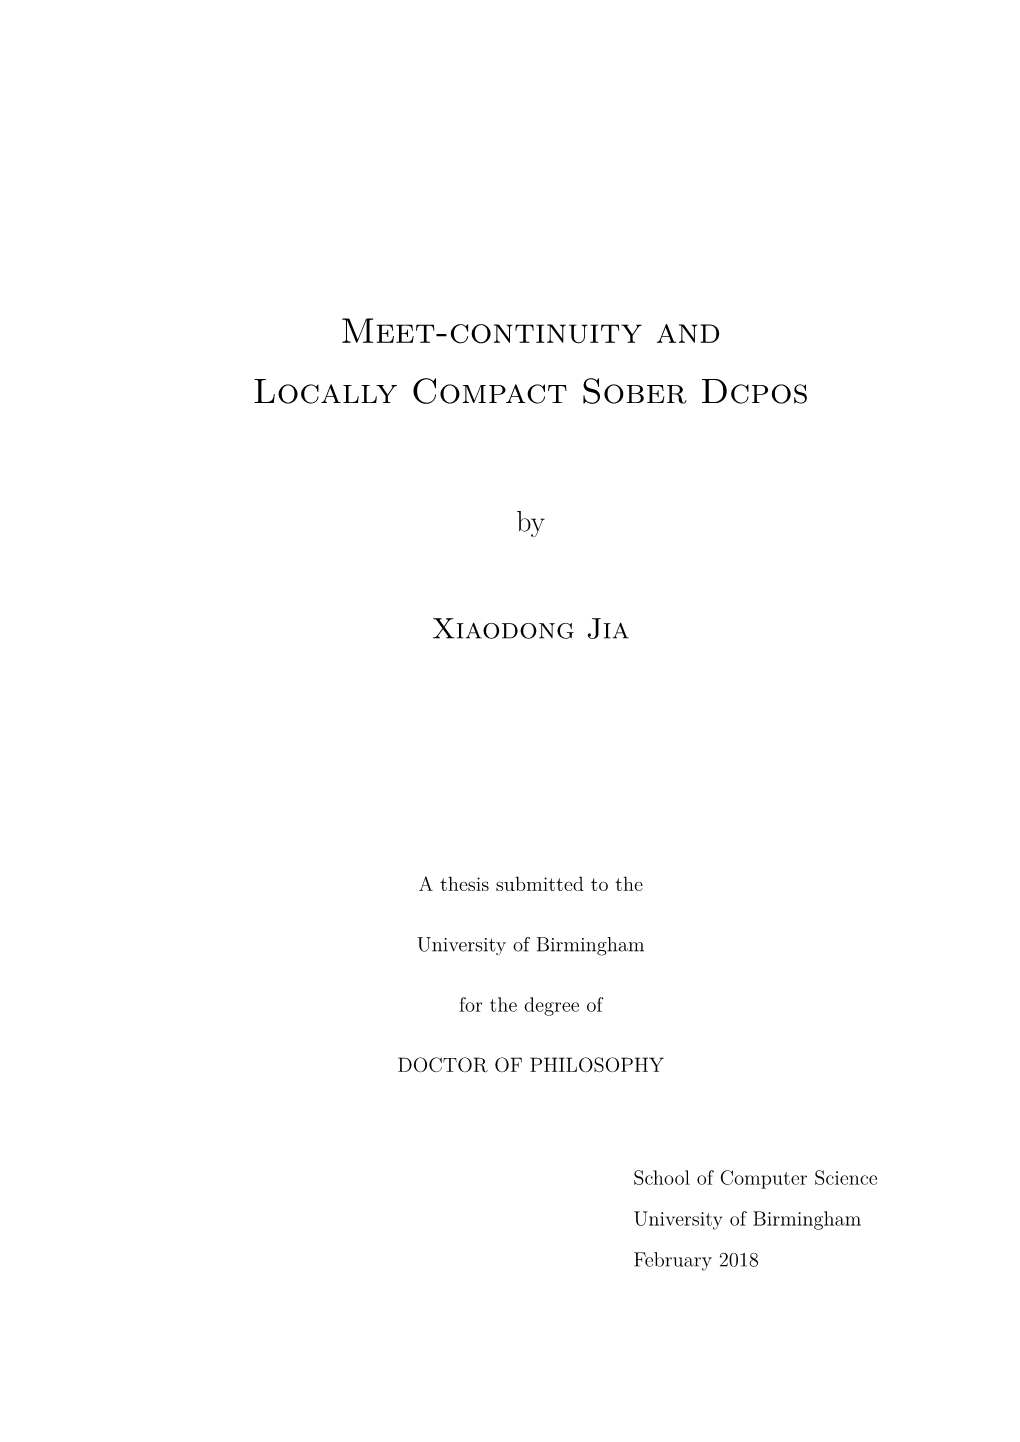 Meet-Continuity and Locally Compact Sober Dcpos